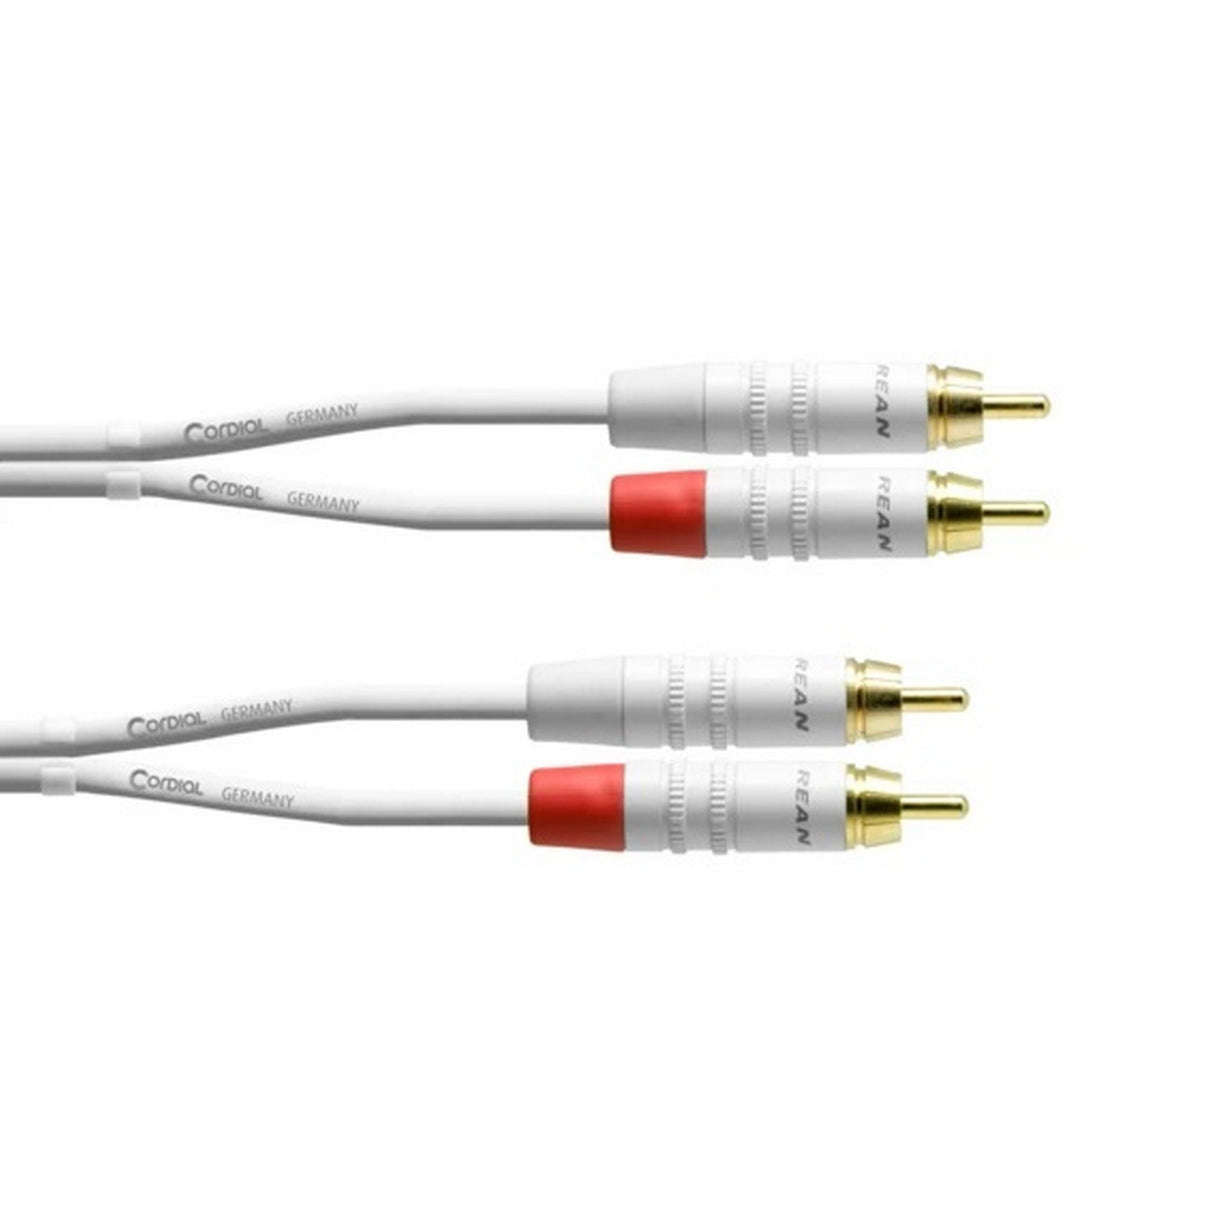 Cordial CFU 0.6 CC-SNOW 2 x RCA to 2 x RCA Twin Cable/Adapter, White, 2-Feet